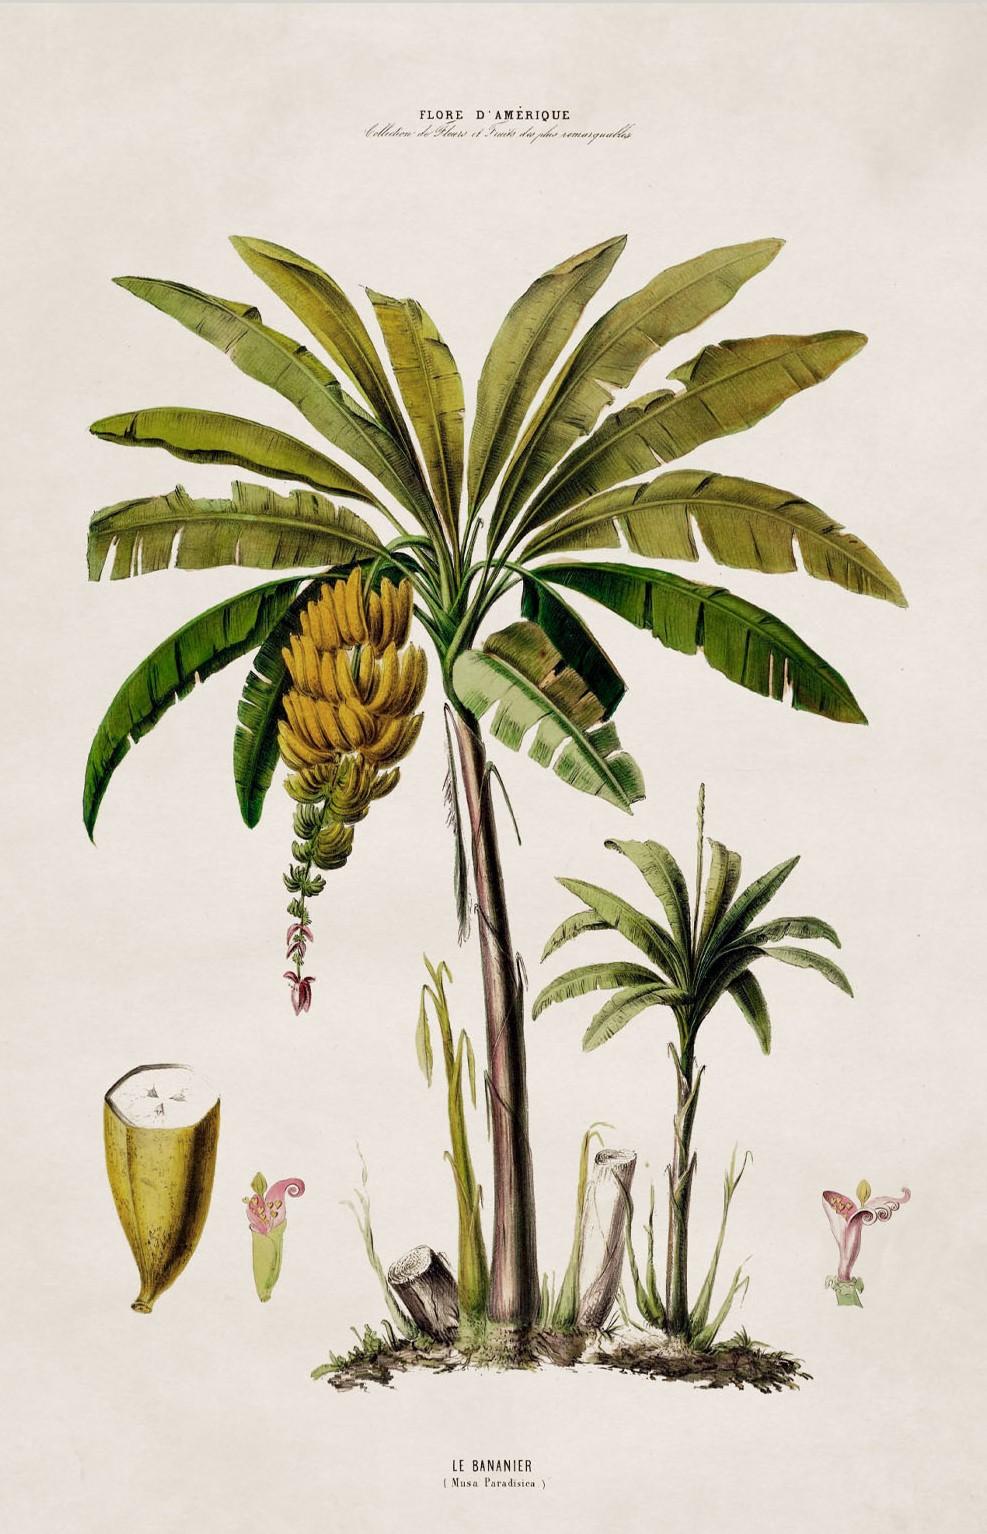 Victorian Set of FOUR Framed Prints of South American Palm Trees from 1843 originals, New For Sale